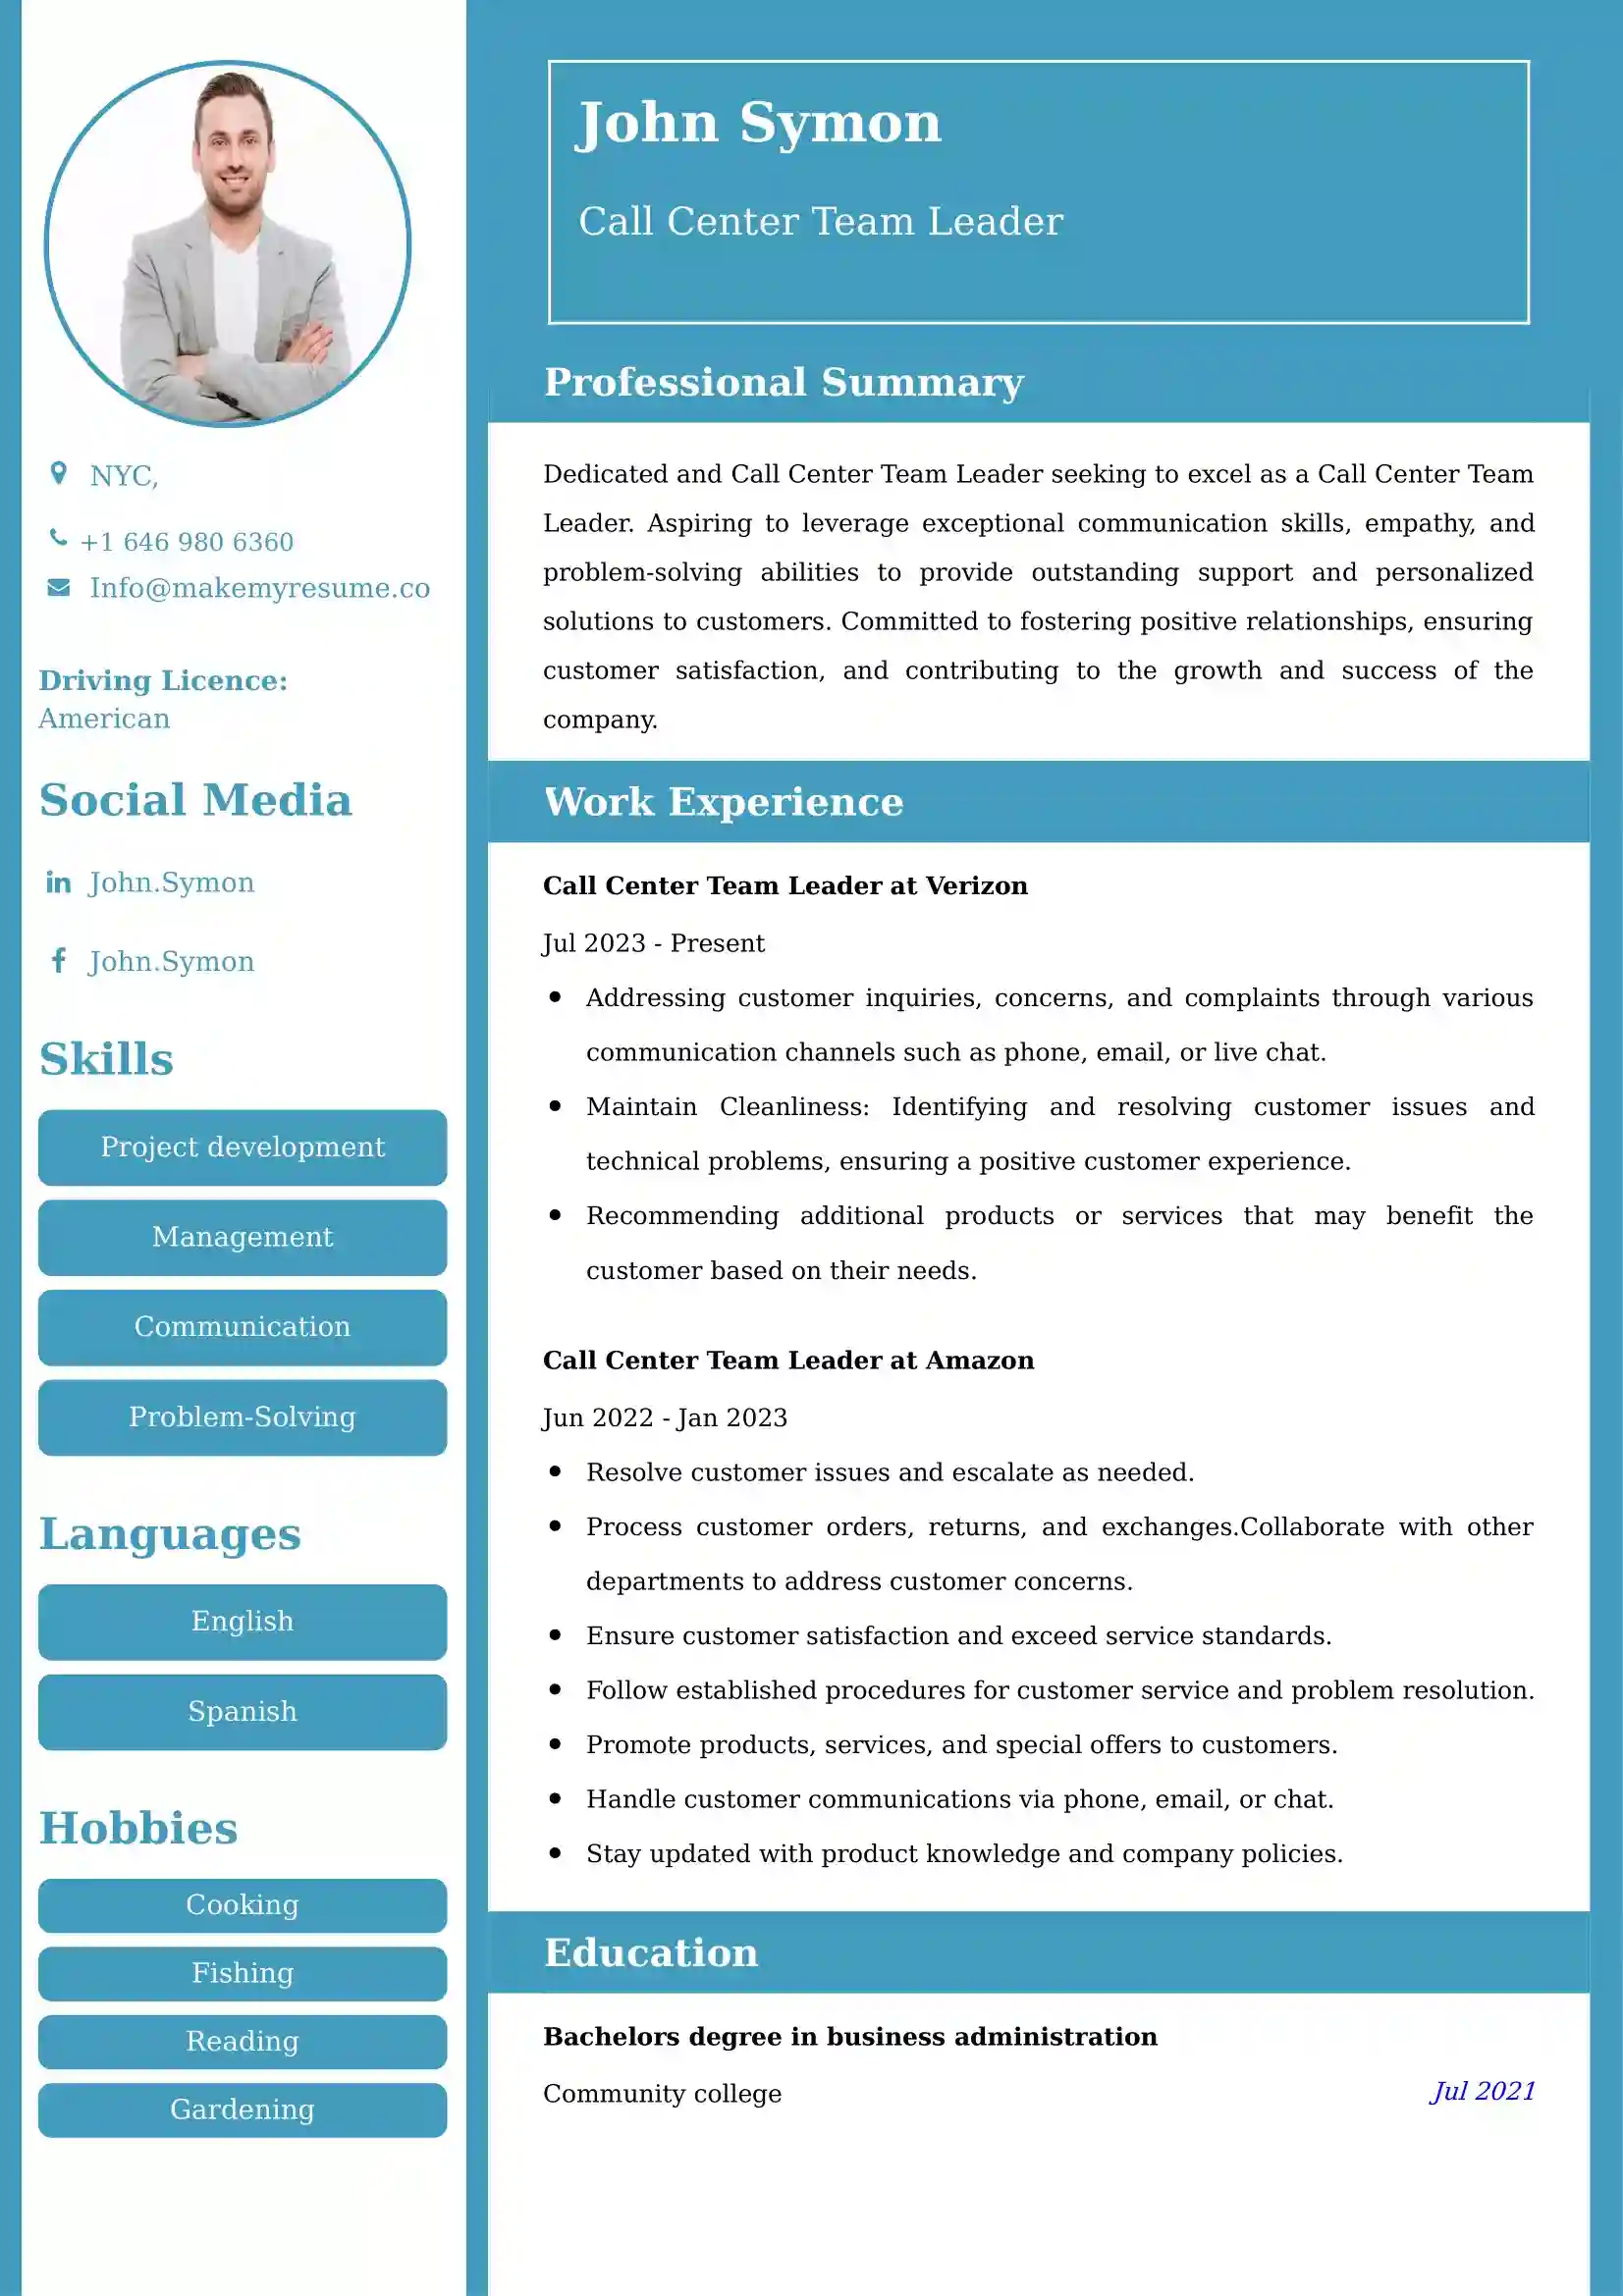 Call Center Team Leader Resume Examples - Brazilian Format, Latest Template